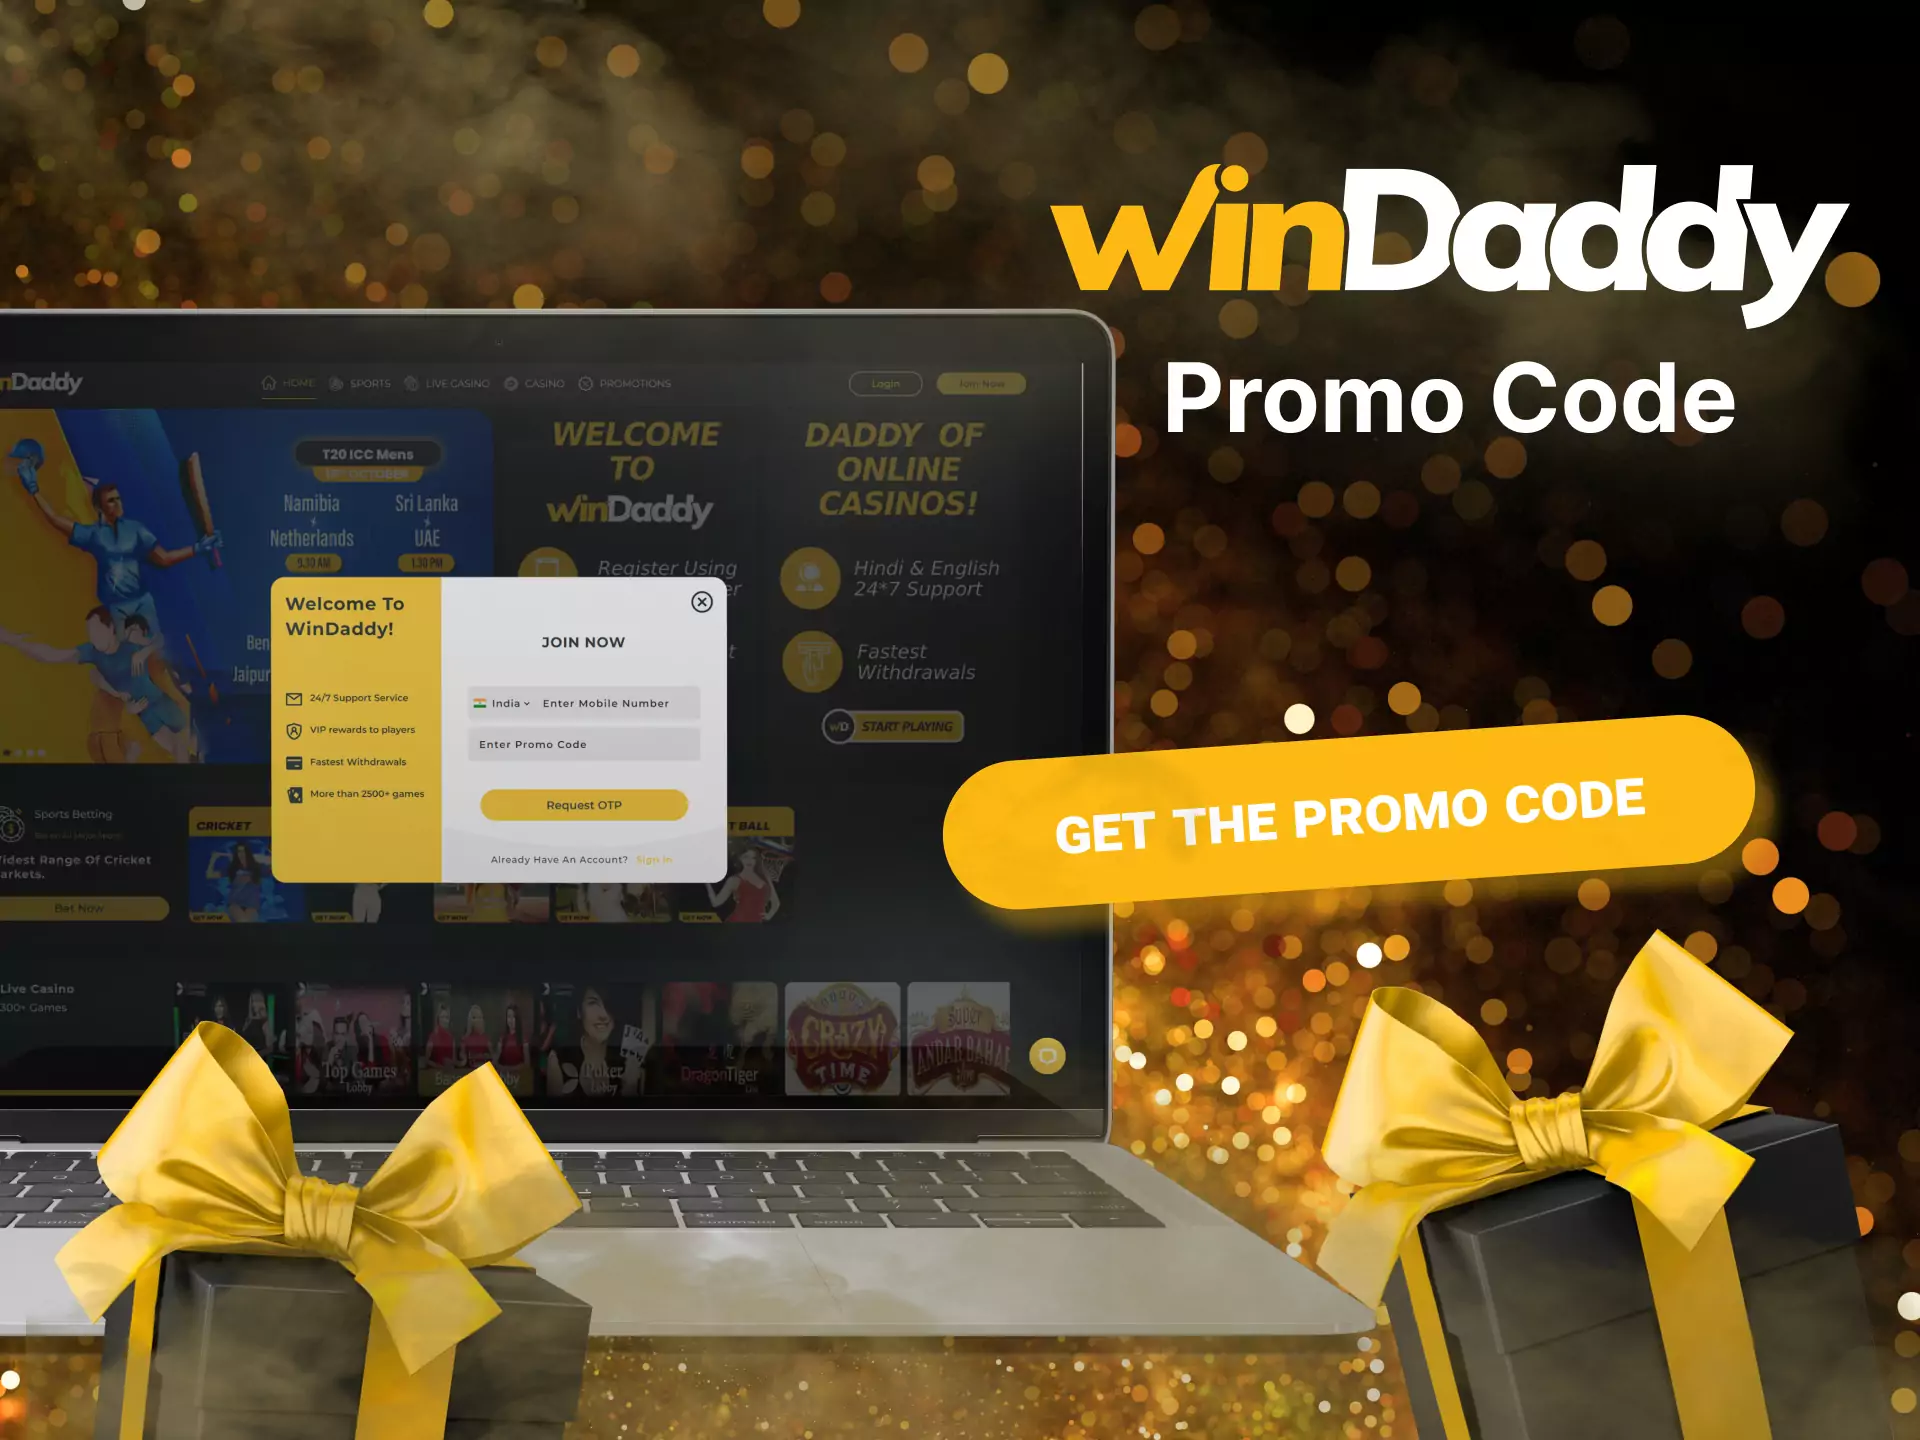 Use the promo code on the Windaddy website to get special bonuses.